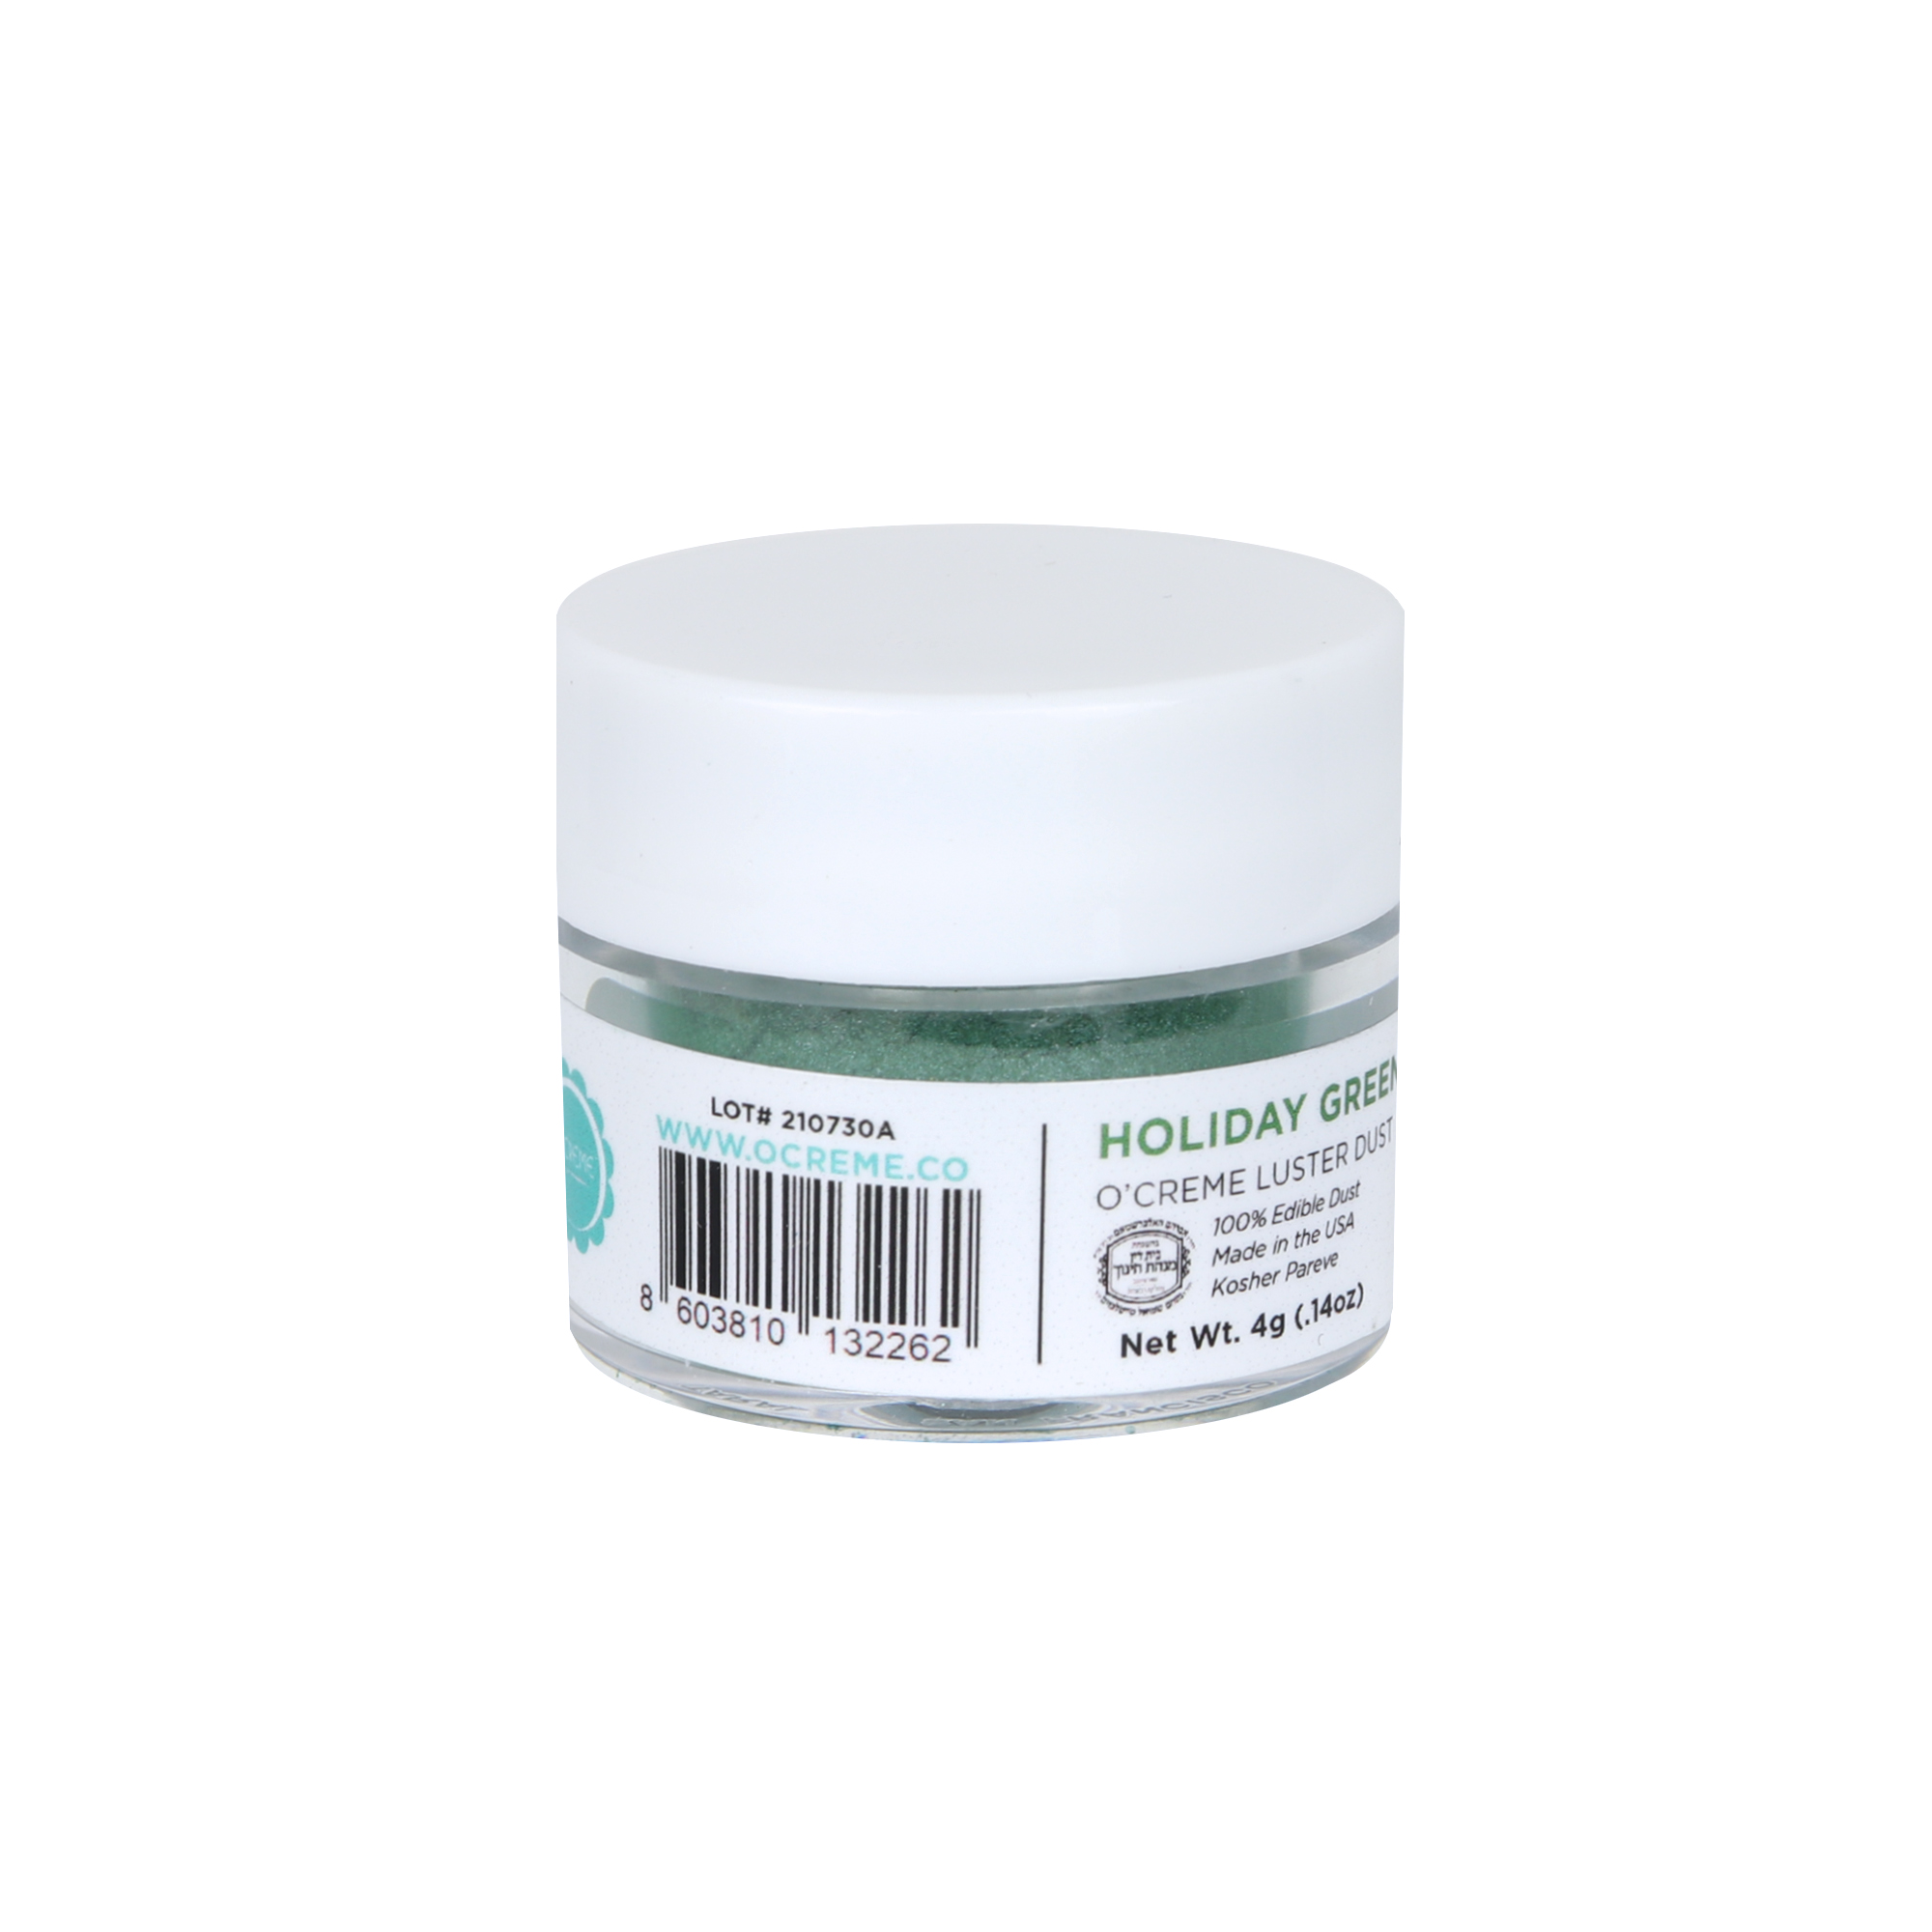 O'Creme Holiday Green Luster Dust, 4 gr. image 1